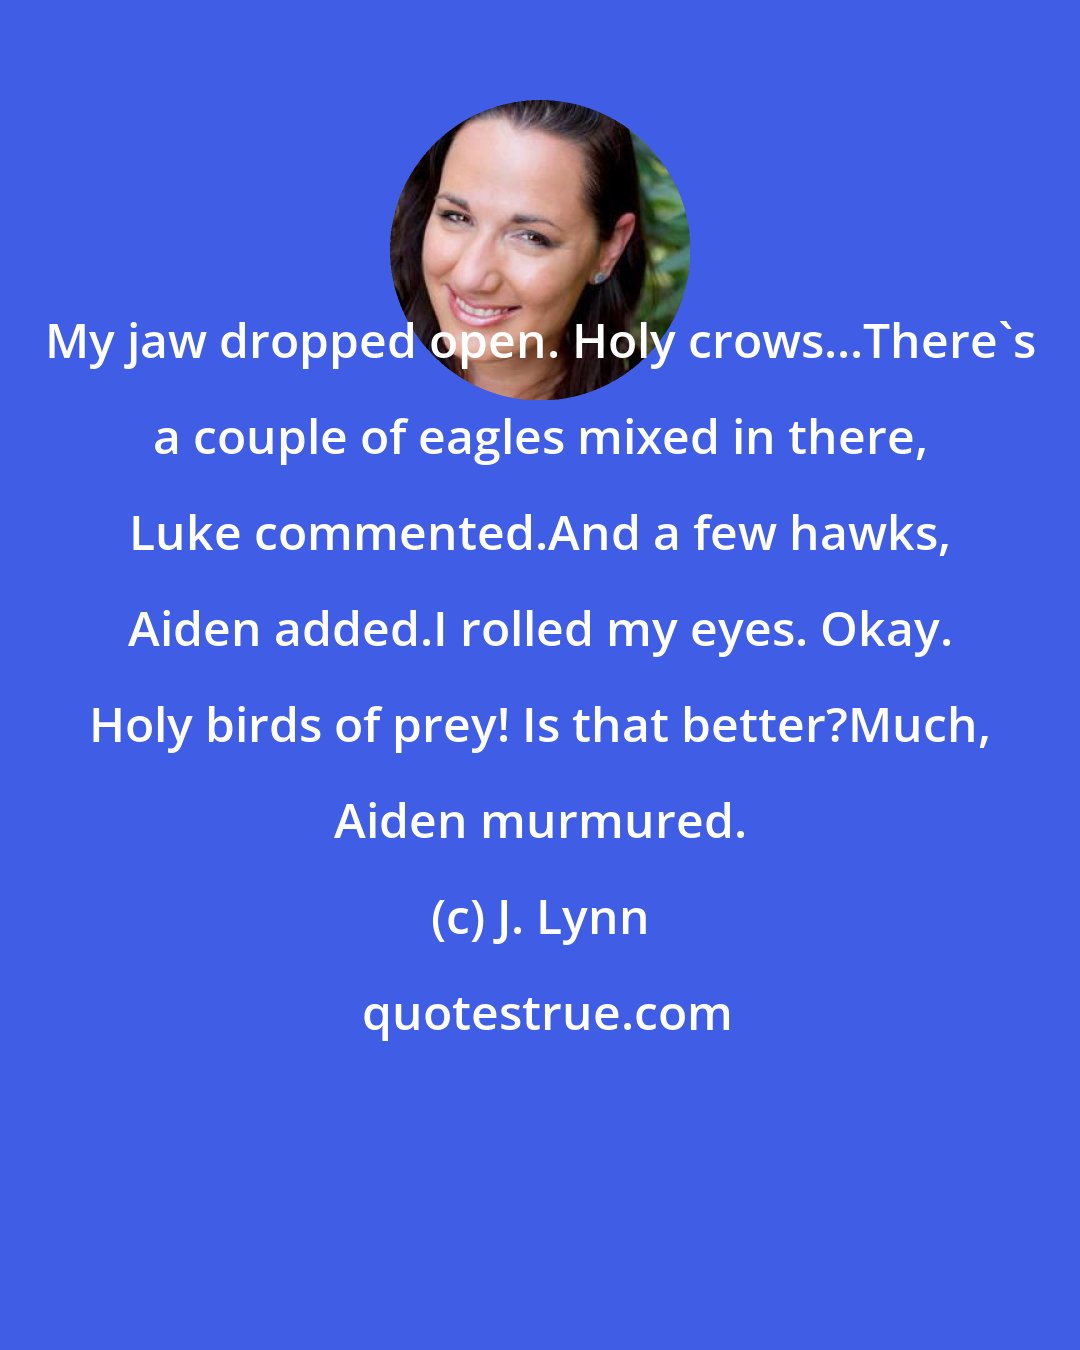 J. Lynn: My jaw dropped open. Holy crows...There's a couple of eagles mixed in there, Luke commented.And a few hawks, Aiden added.I rolled my eyes. Okay. Holy birds of prey! Is that better?Much, Aiden murmured.